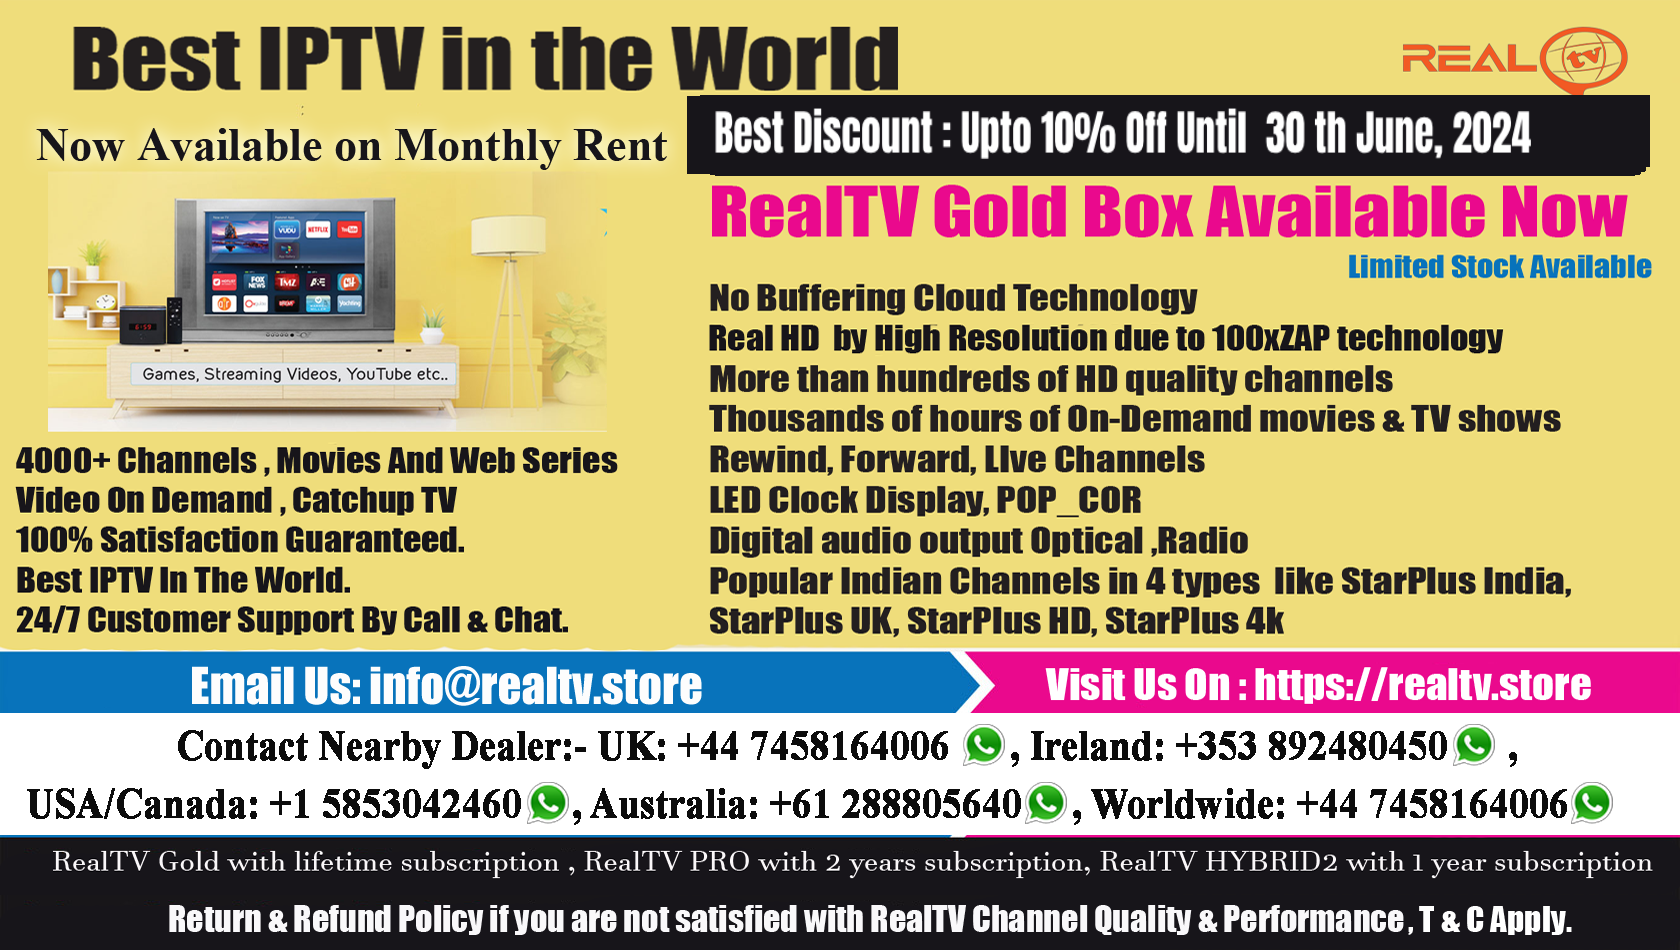 RealTv.store Real TV GOLD, HYBRID 3, HYBRID 2 AND PRO